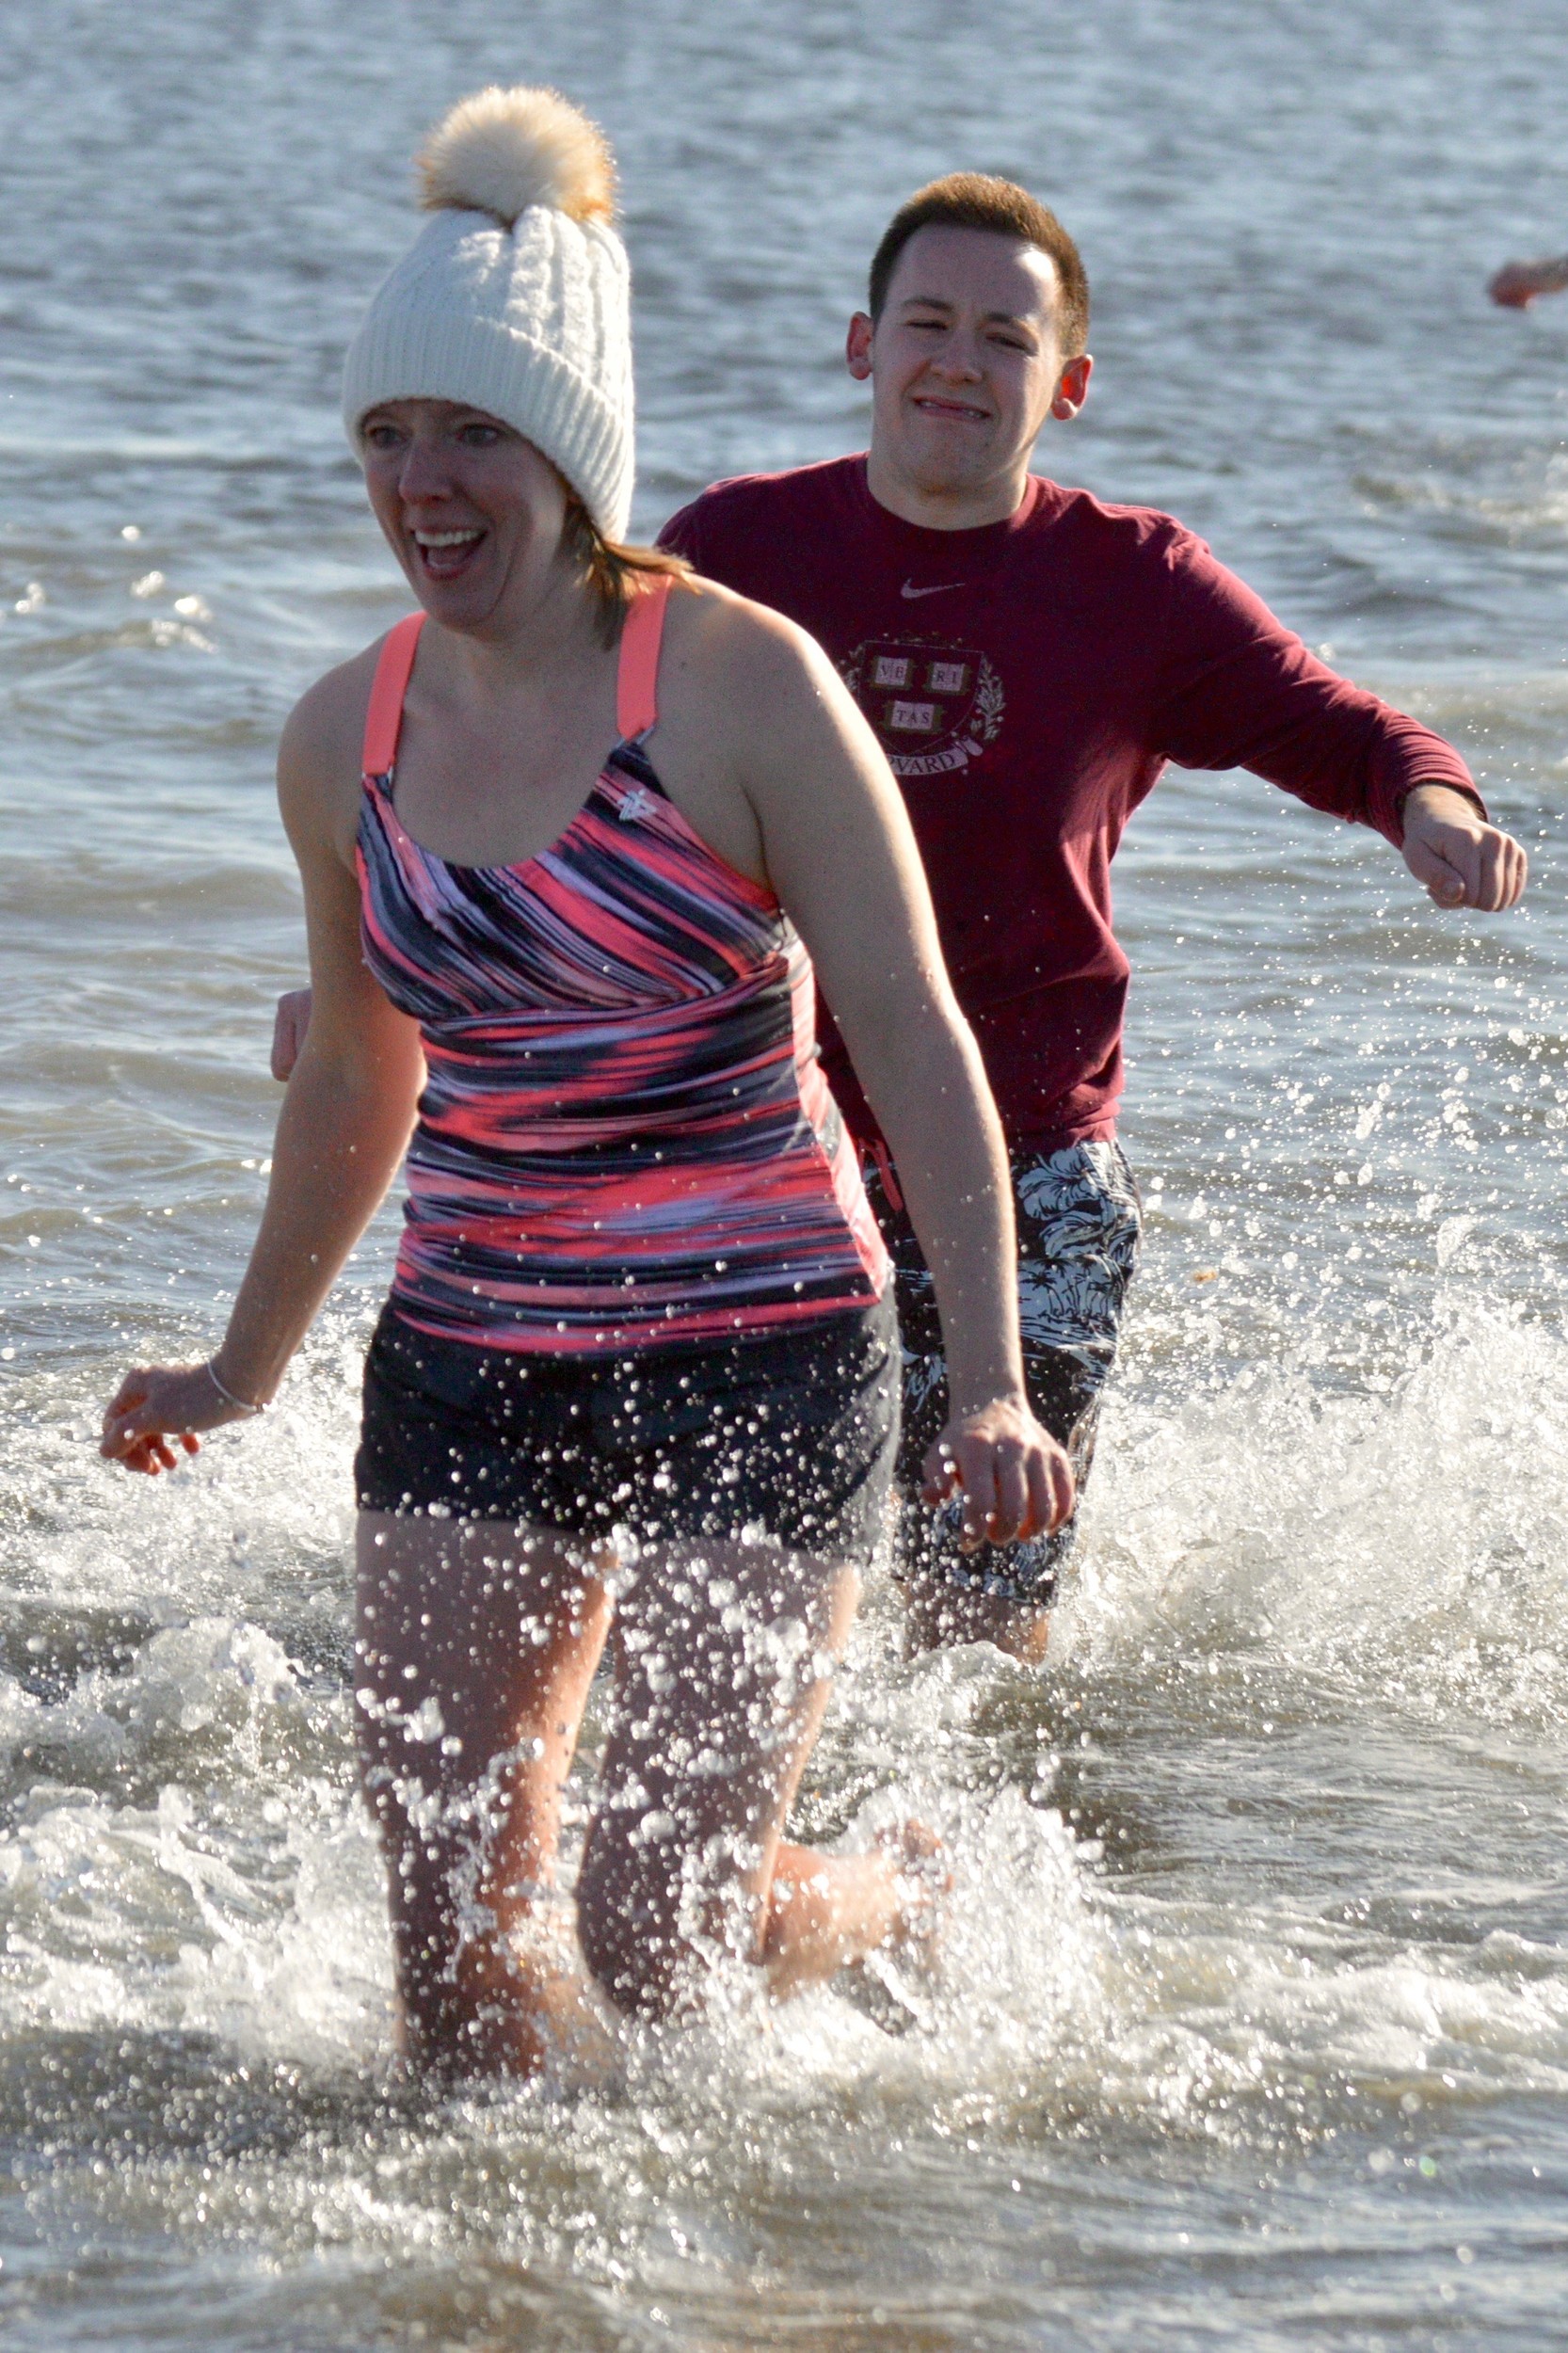 Melissa Reeve at least kept her head warm while she took the plunge. Her son Mickey, 19, also braved the frigid waters.